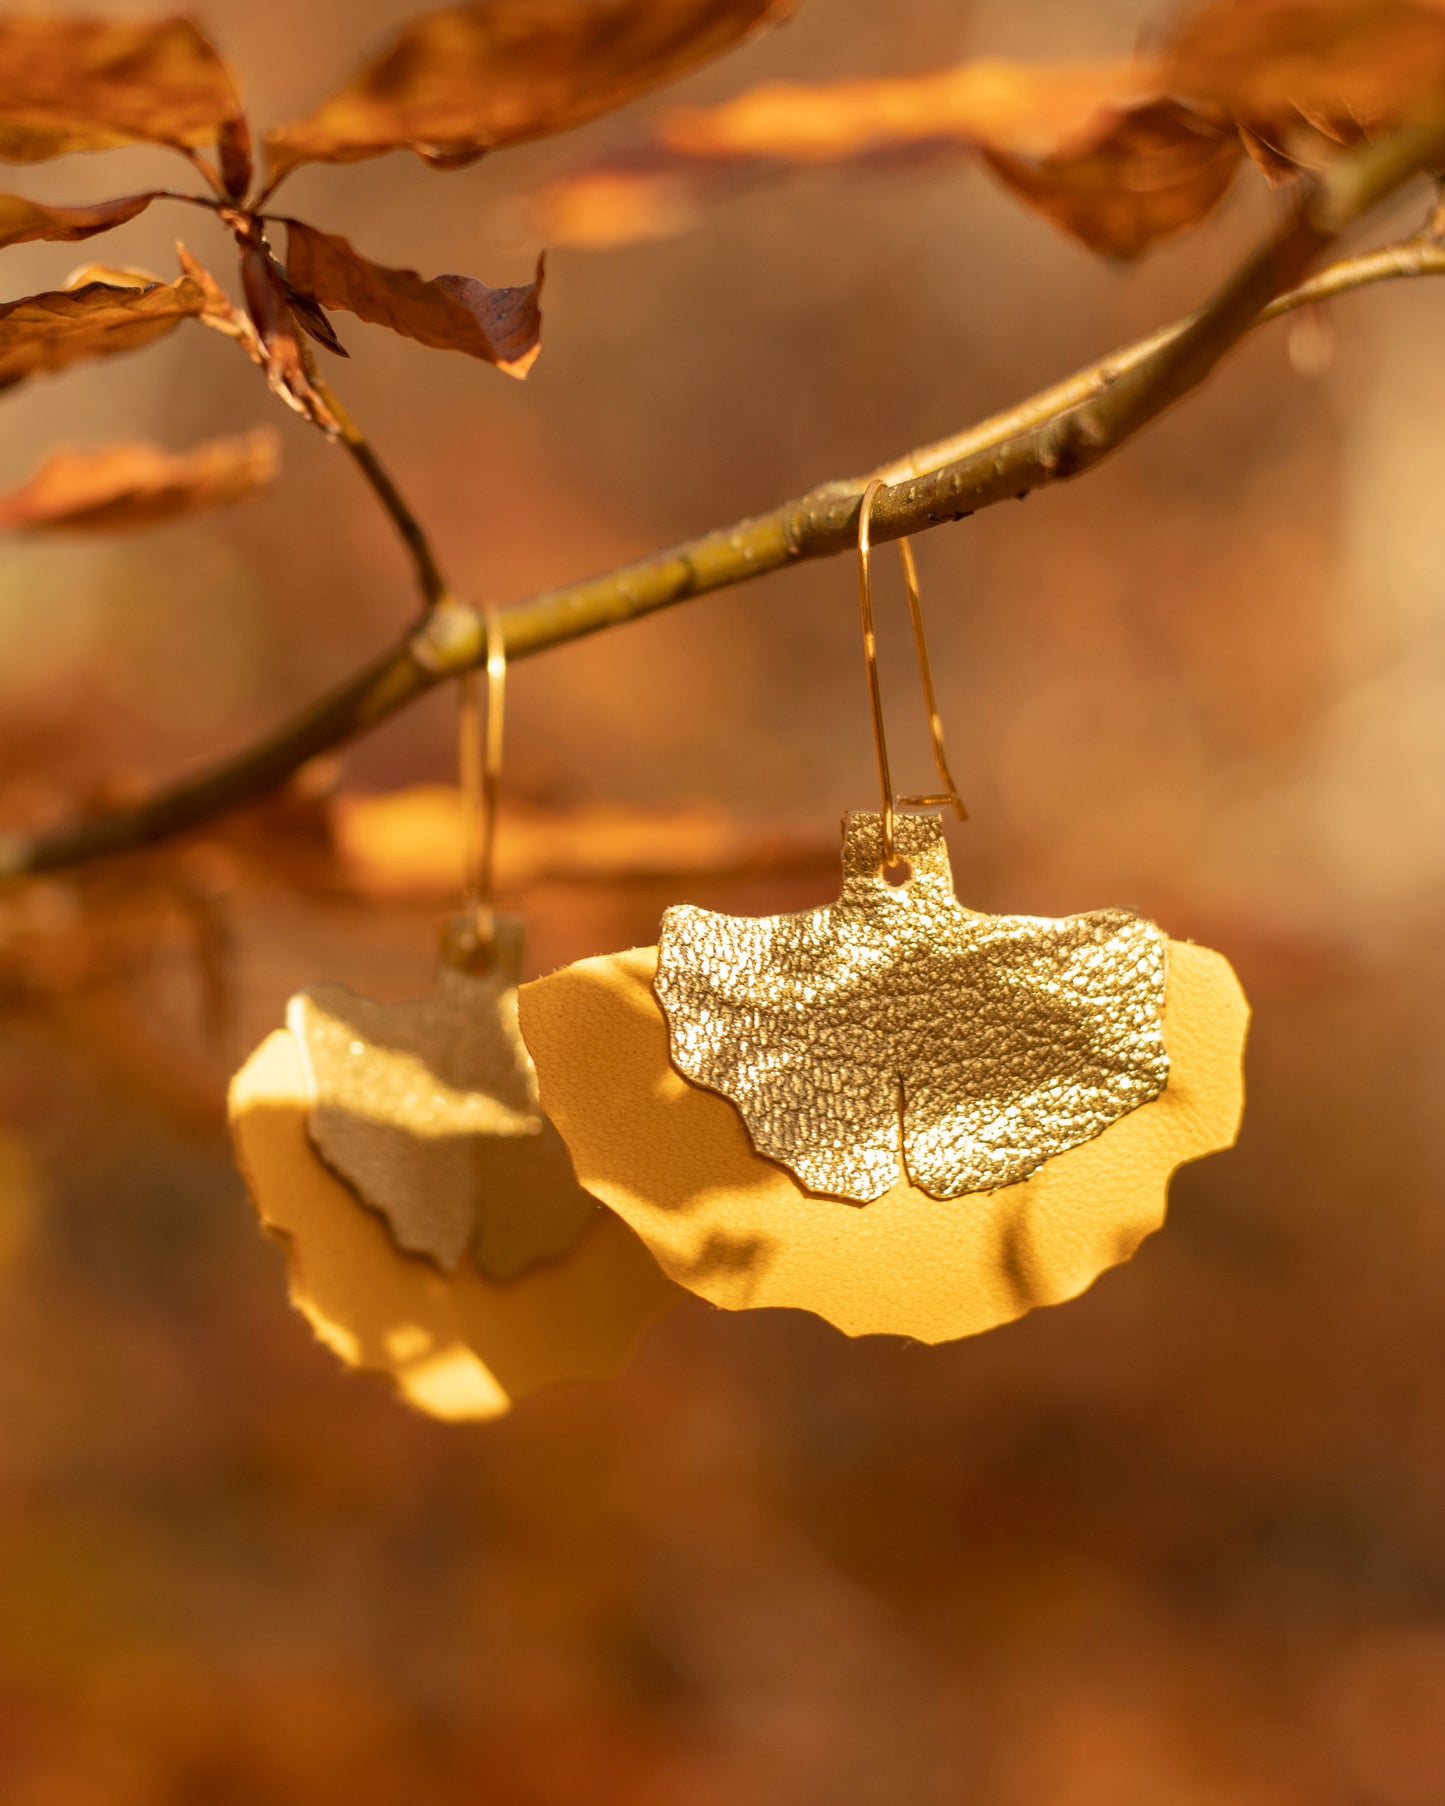 Copy of Ginkgo leaf earrings in ocher and gold yellow leather